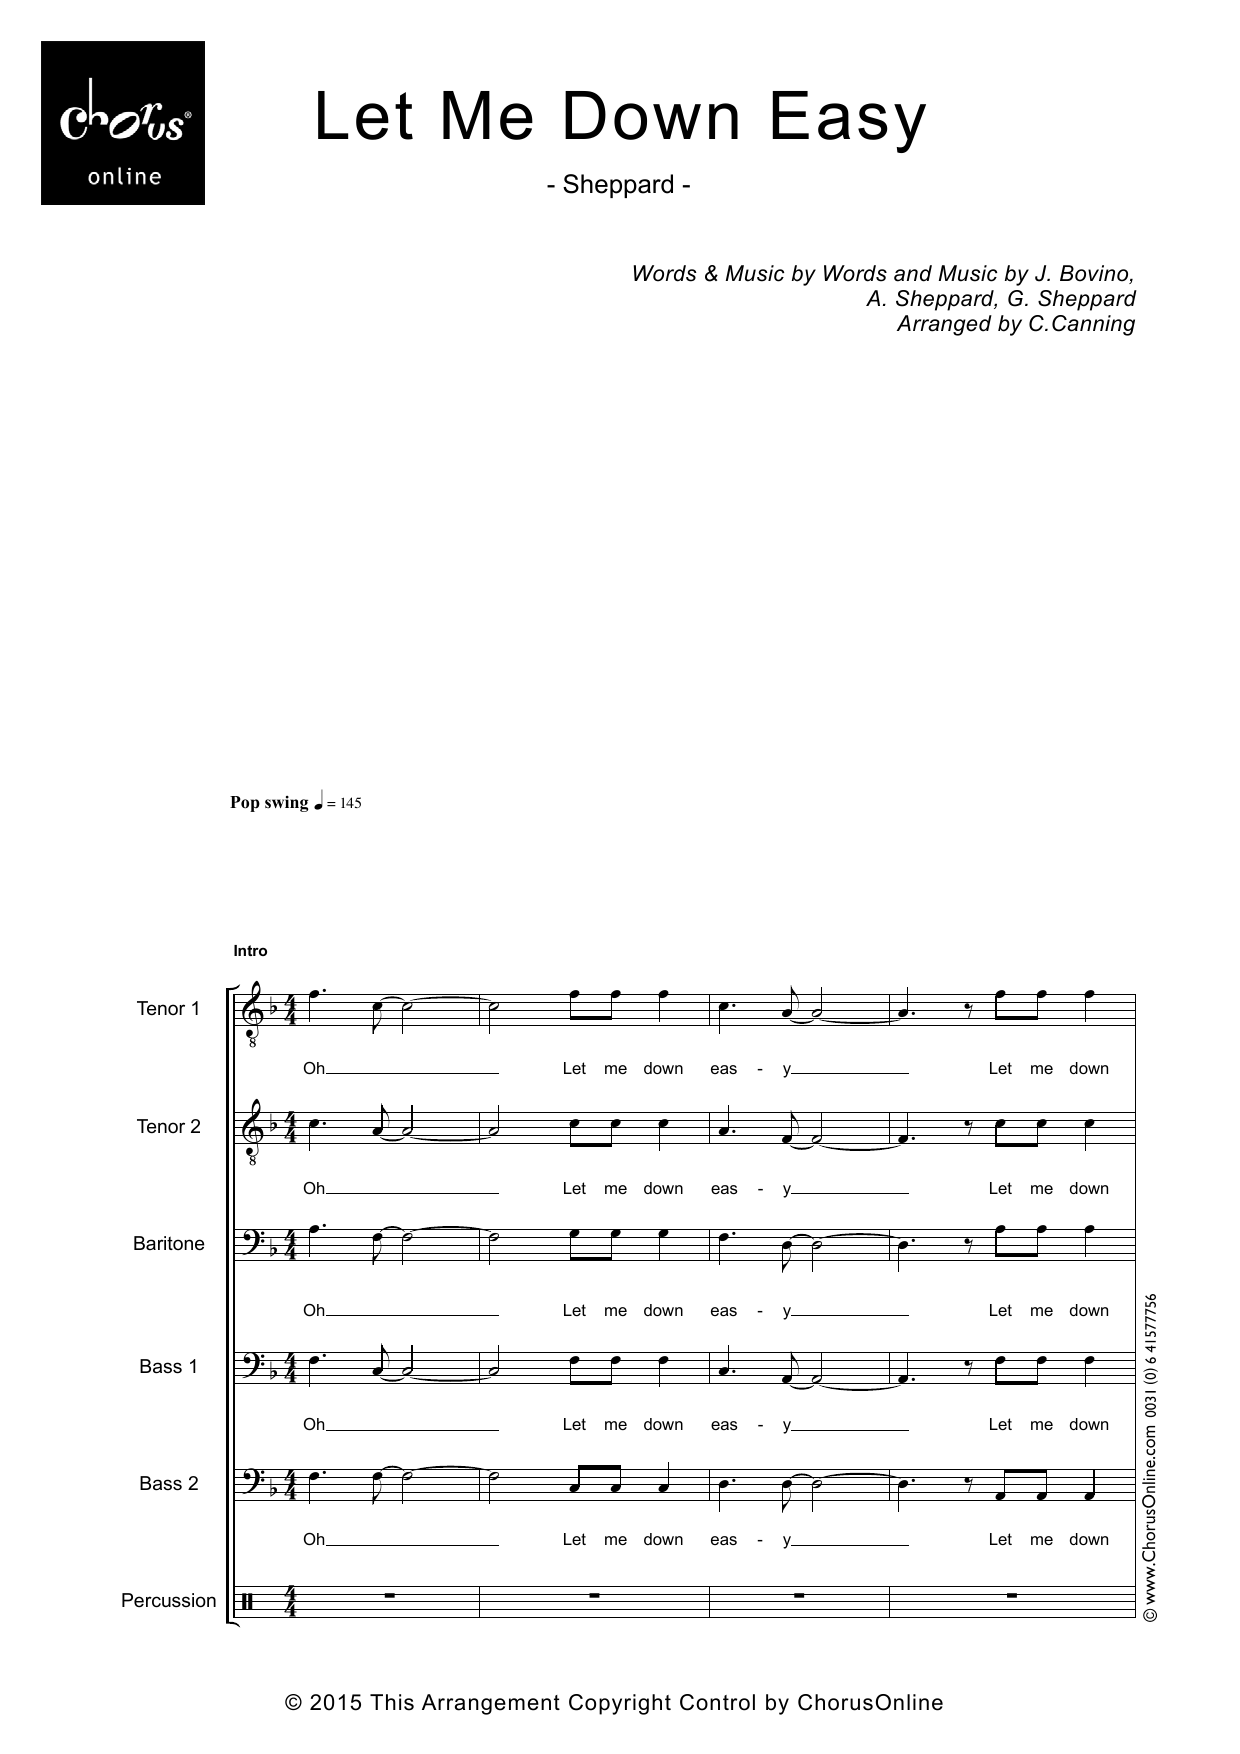 Sheppard Let Me Down Easy (arr. Carol Canning) sheet music notes printable PDF score